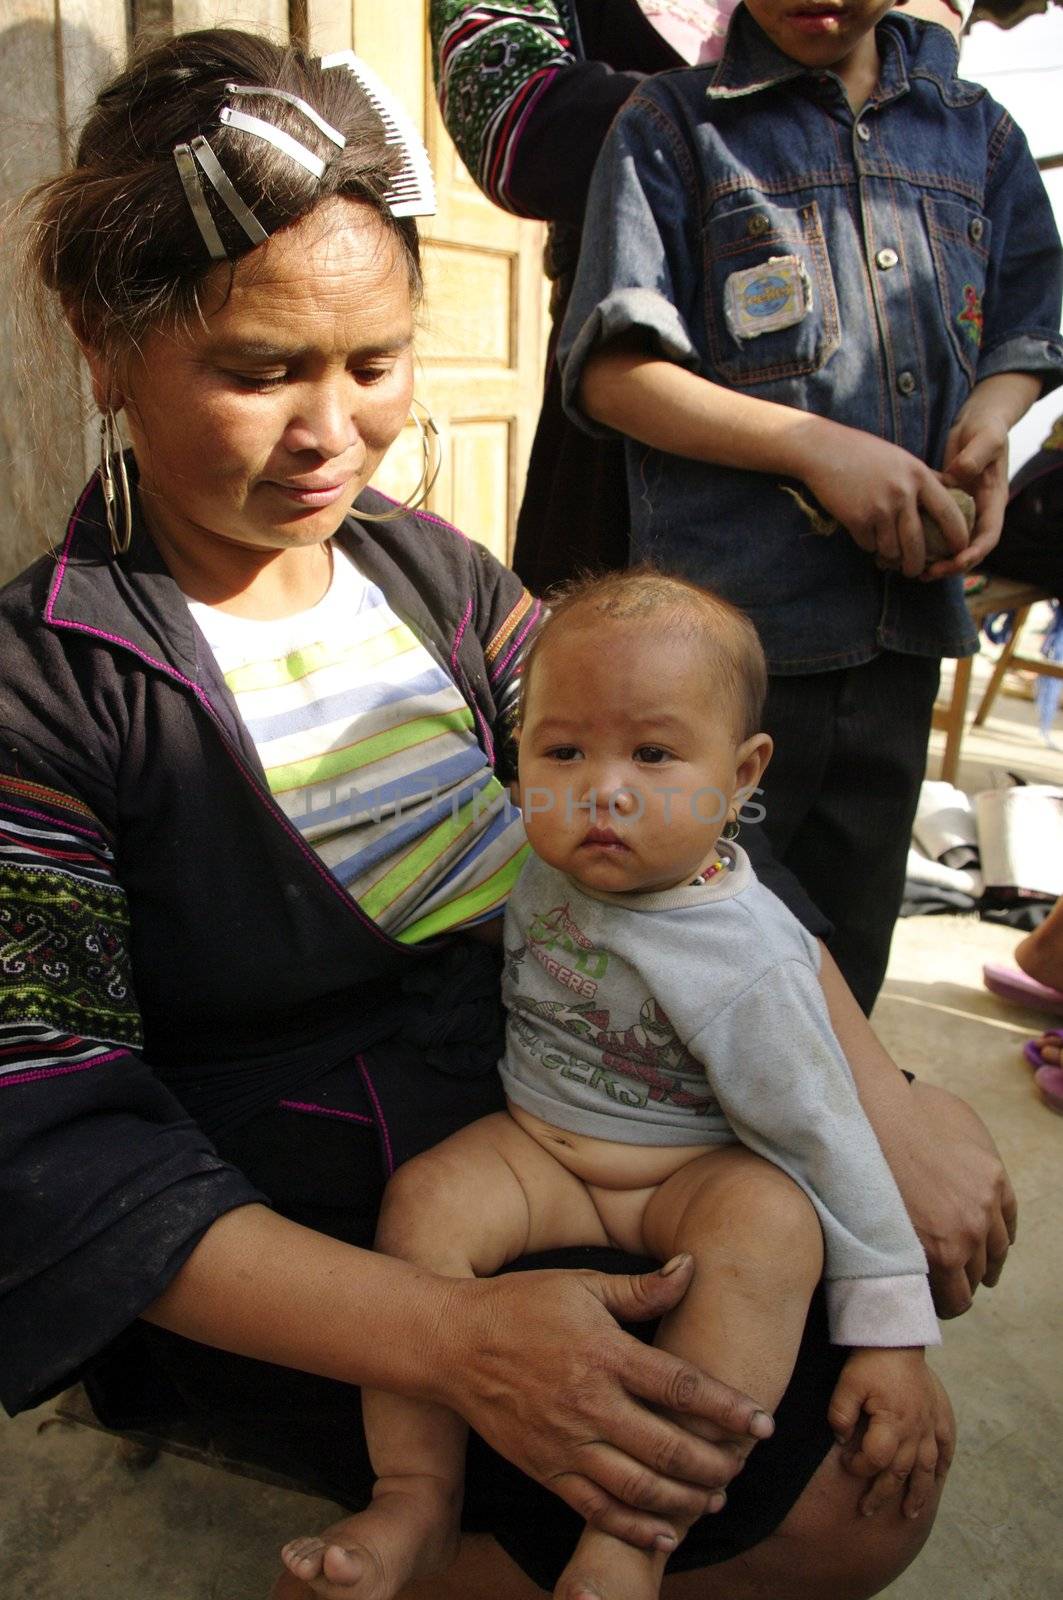 A black Hmong woman and baby by Duroc